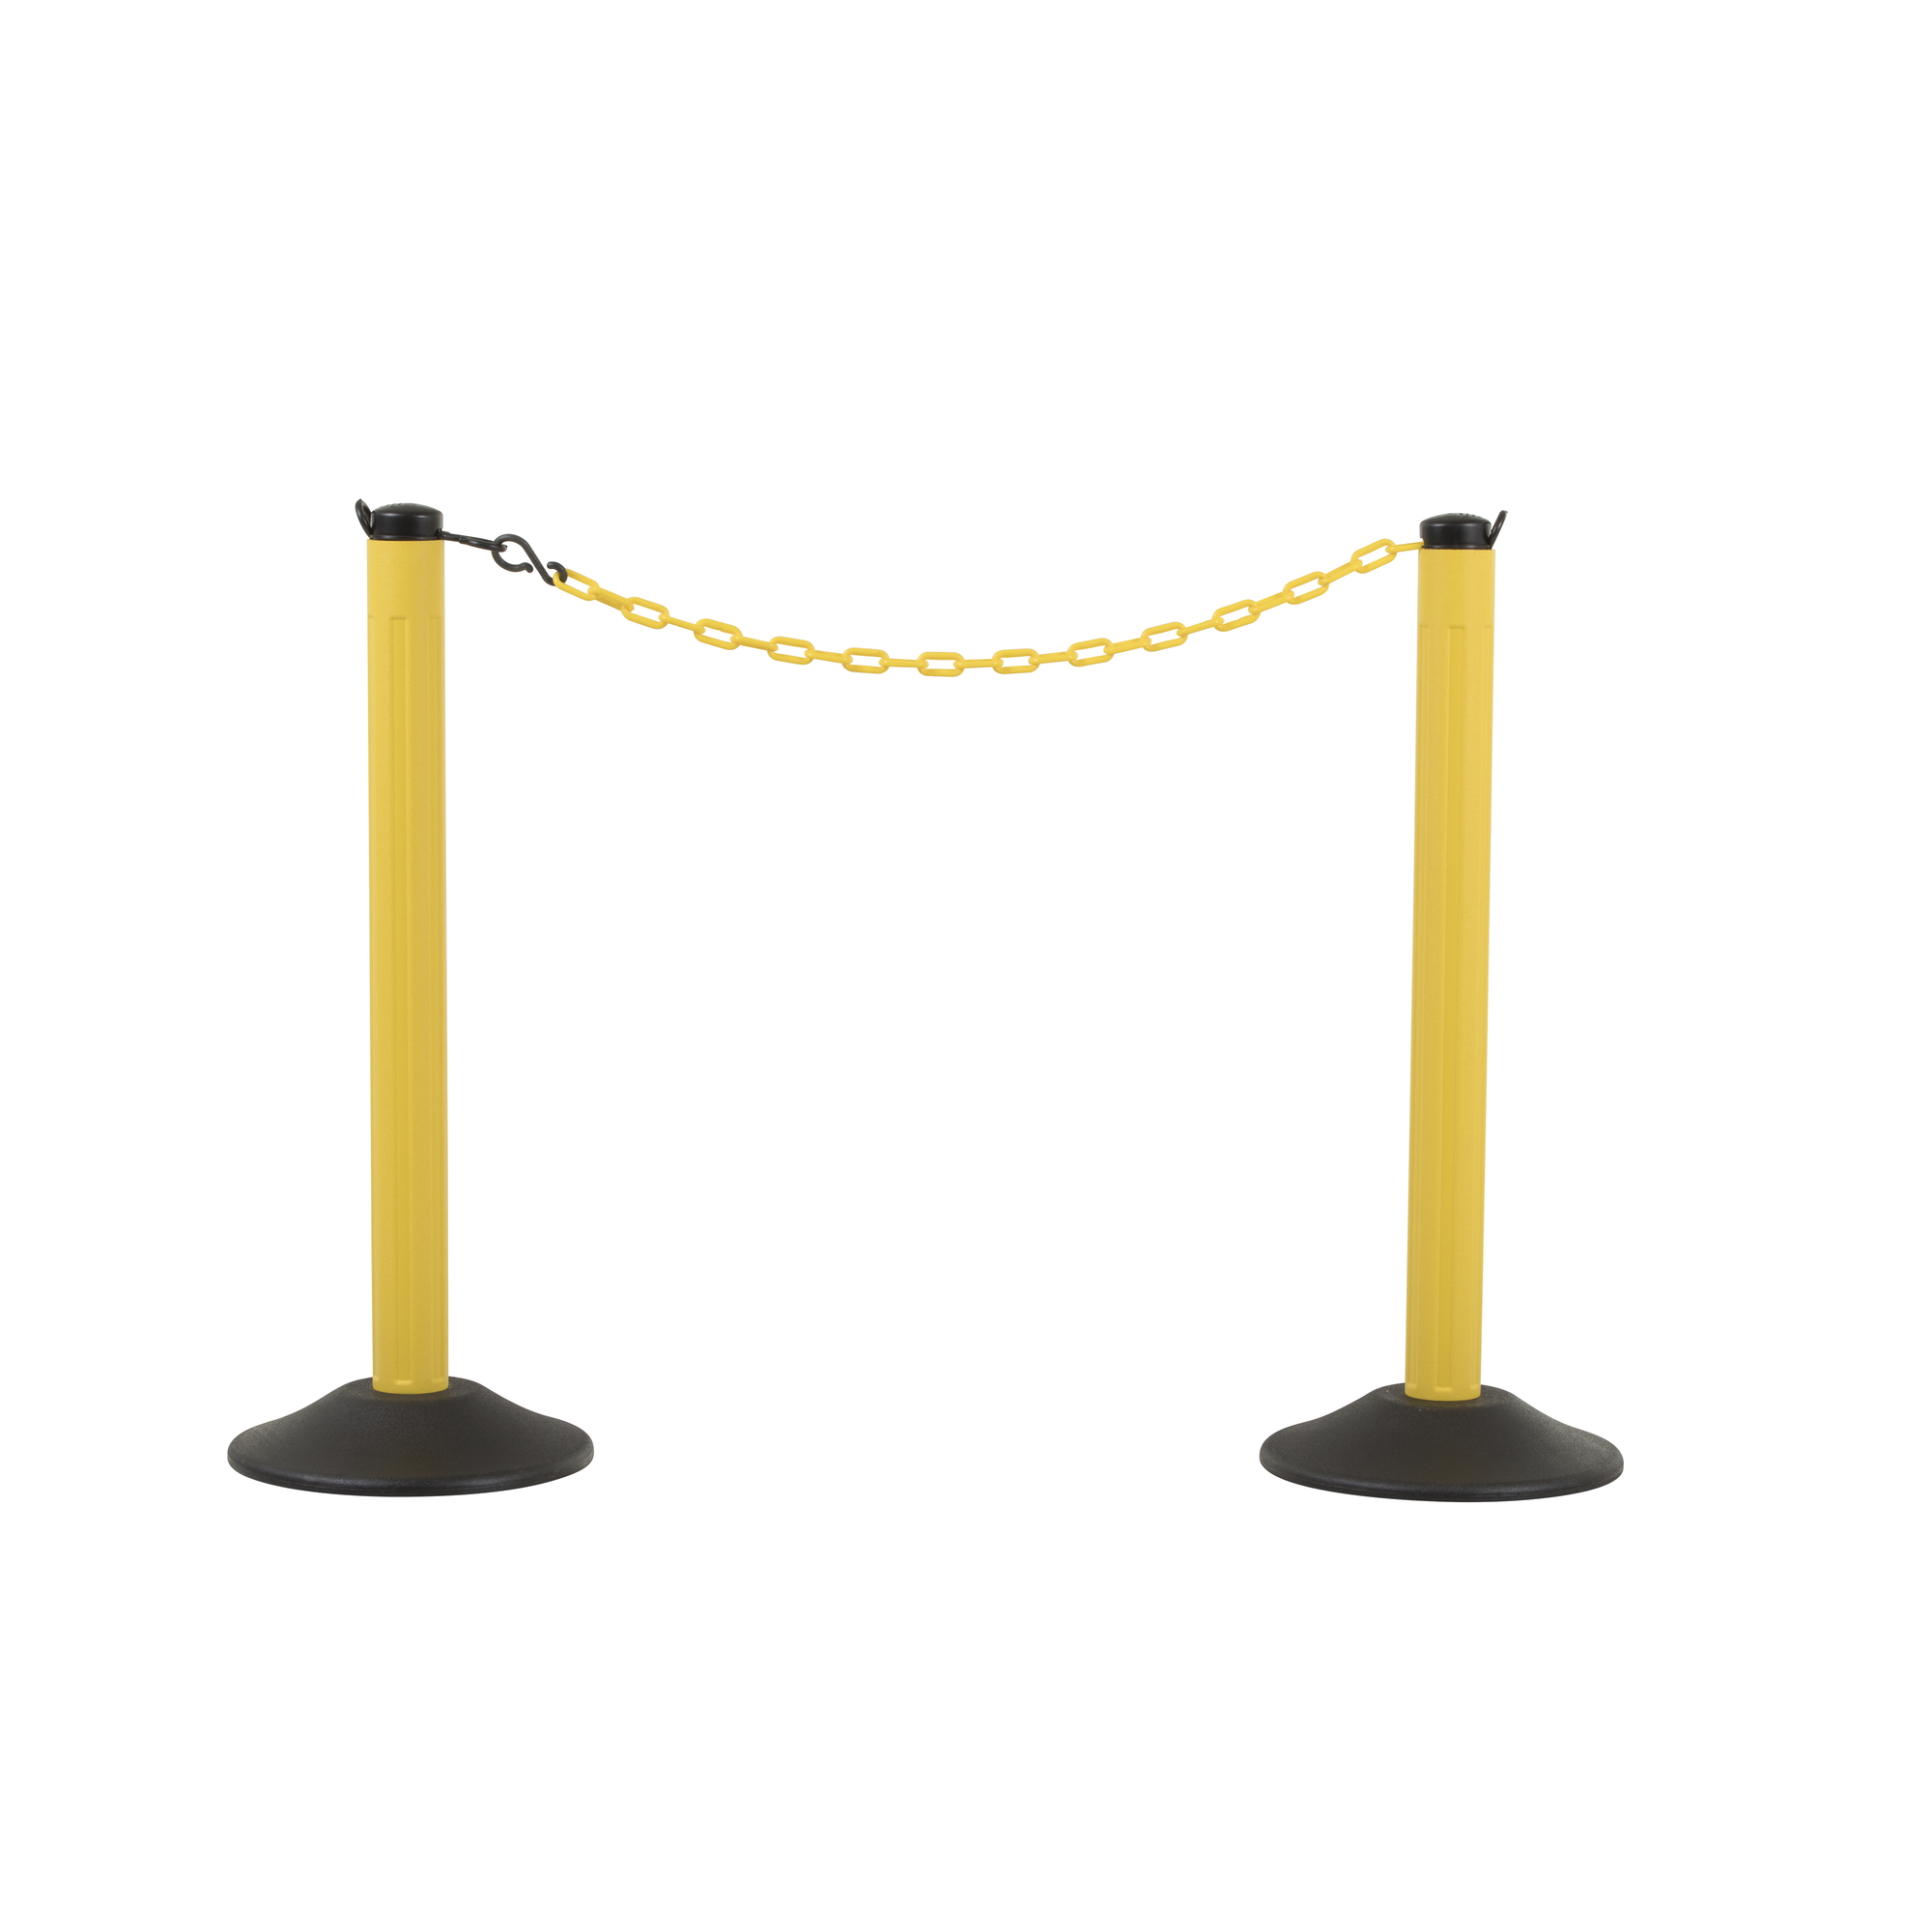 US Weight, 2 Unweighted Yellow Posts, w/ 10ft. of 2Inch Chain, Model U2004YC